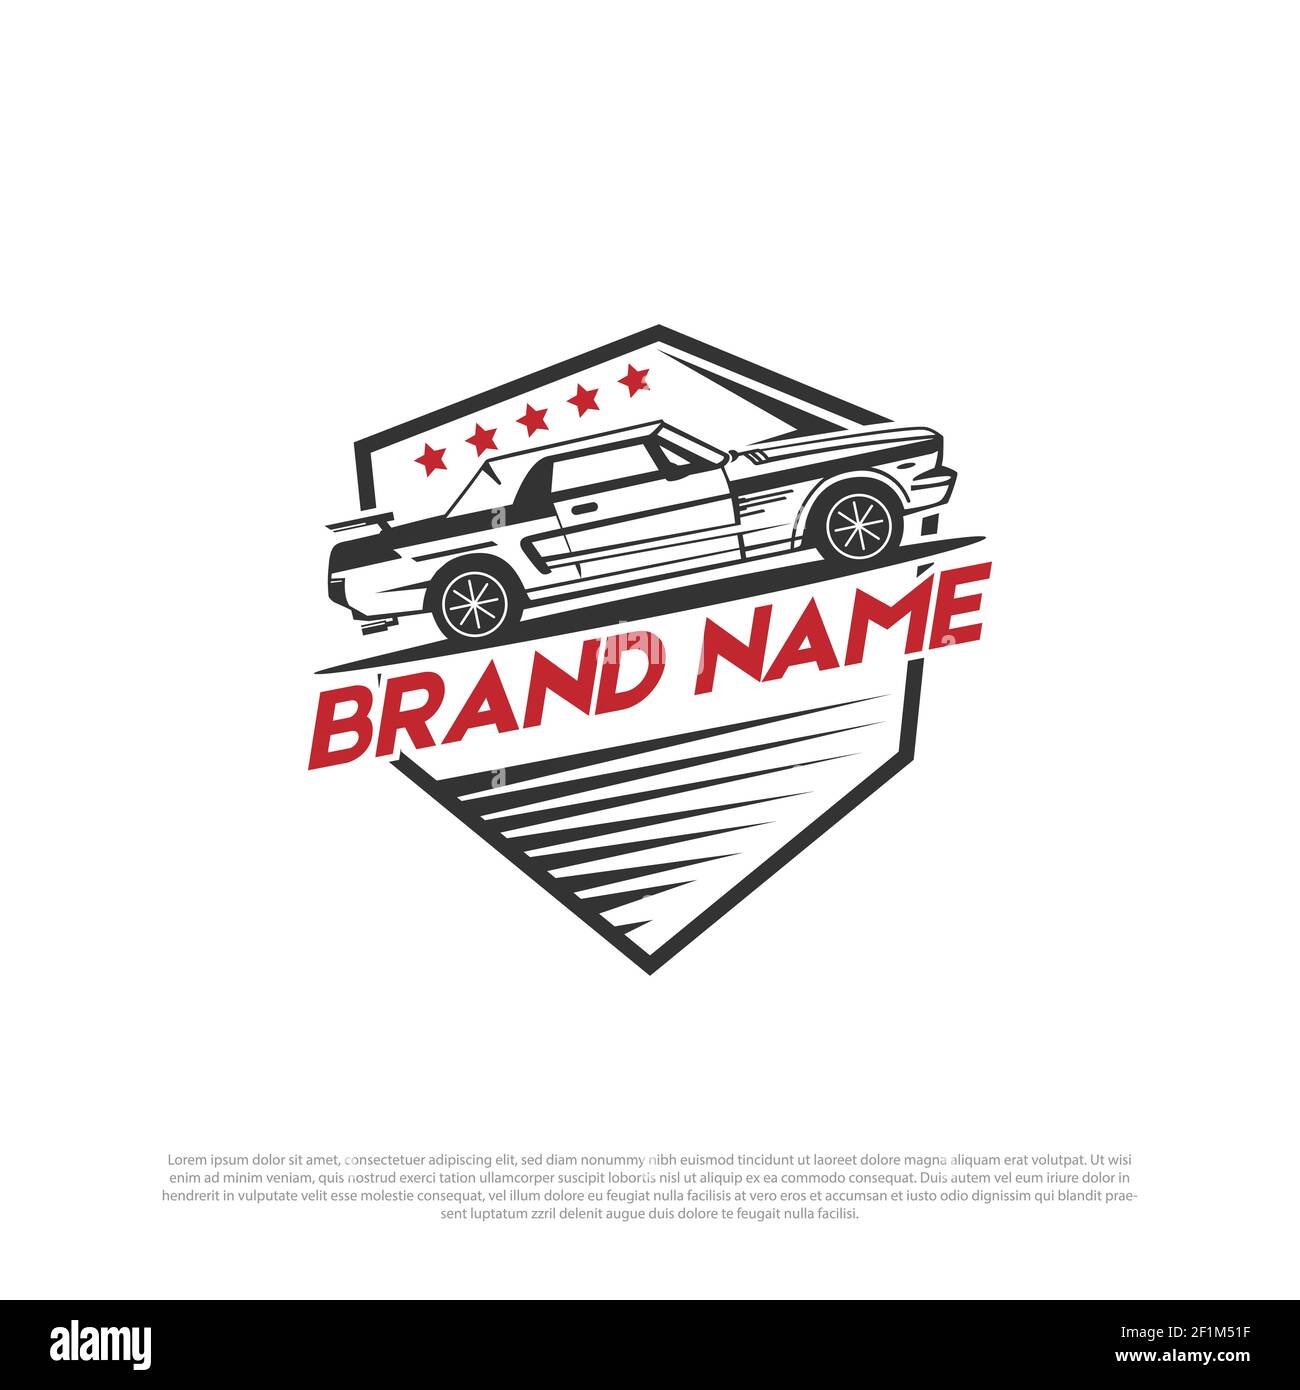 classic racing car logo design inspiration, modification car logo vector template with vintage and retro style Stock Vector